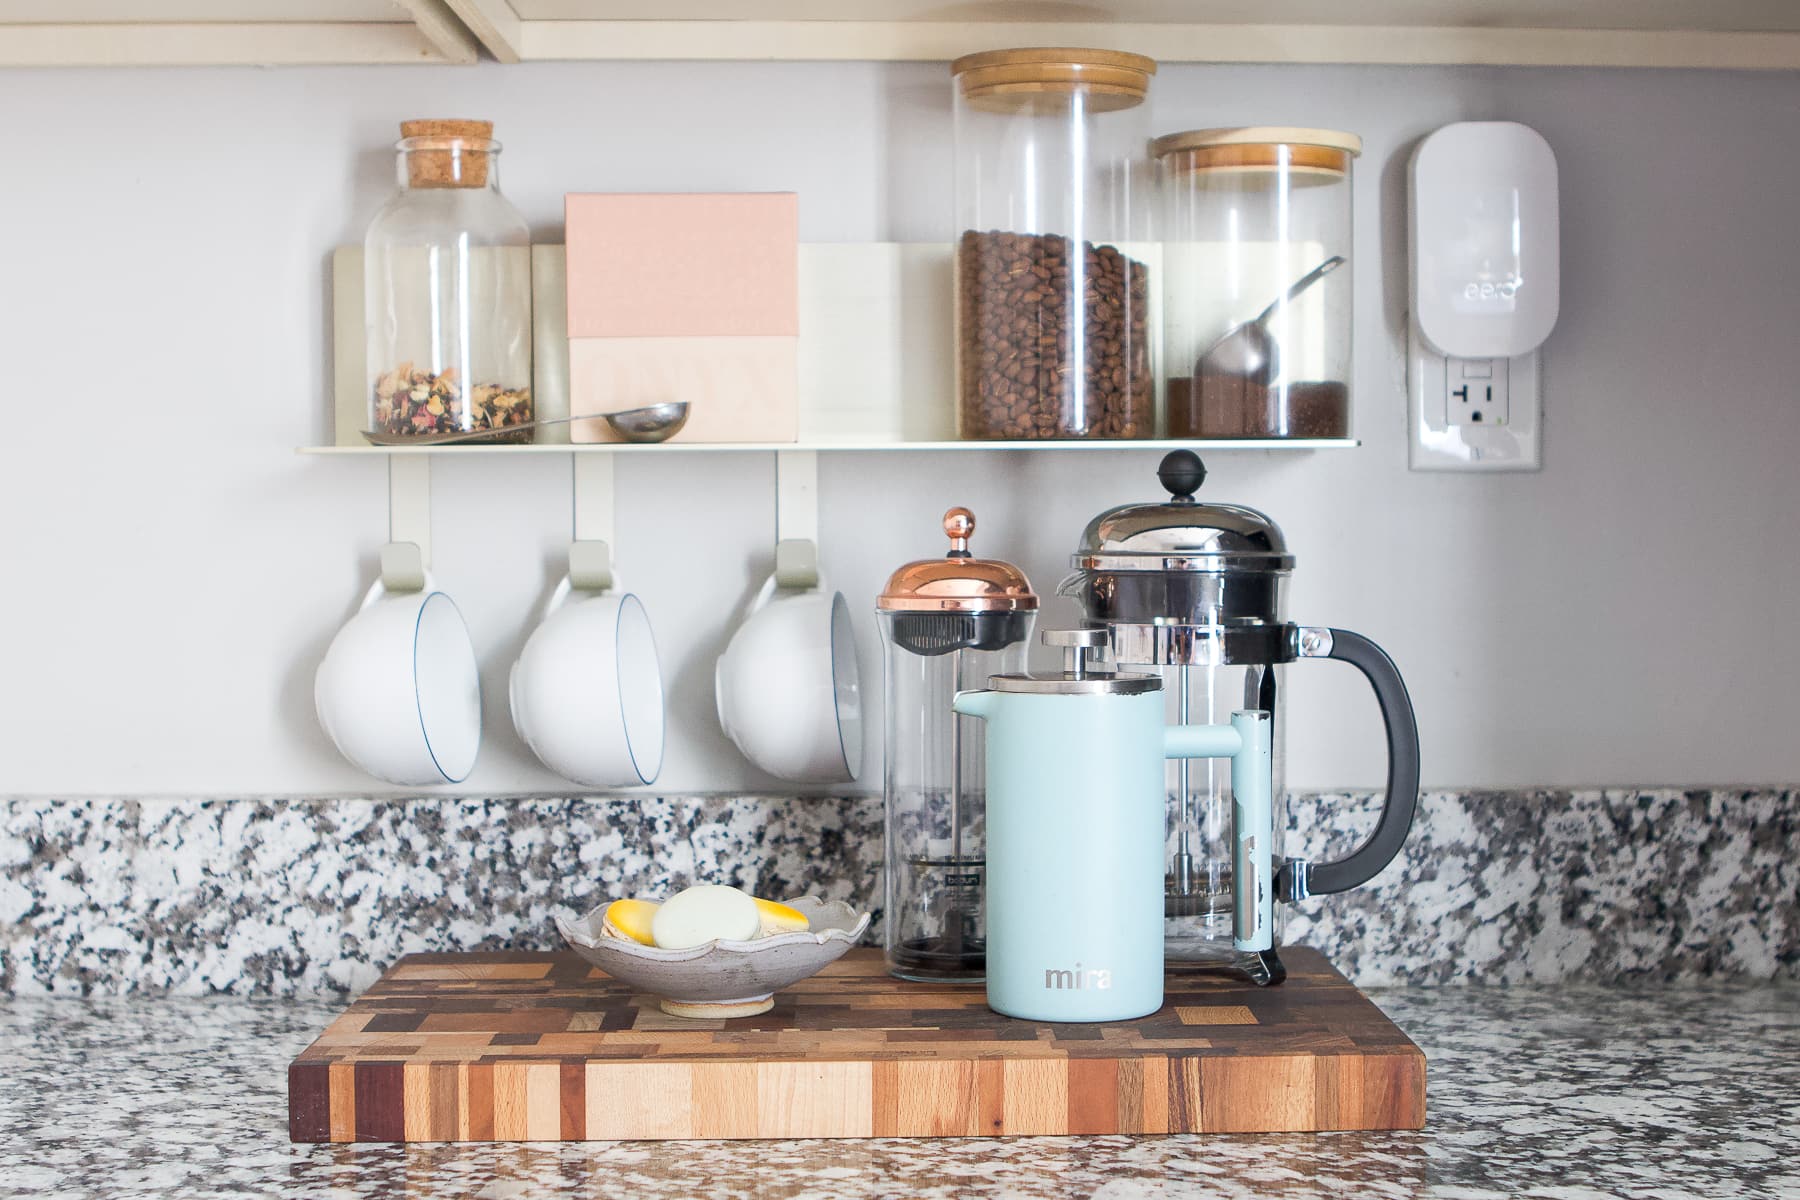 Add a cute coffee bar to your rental kitchen